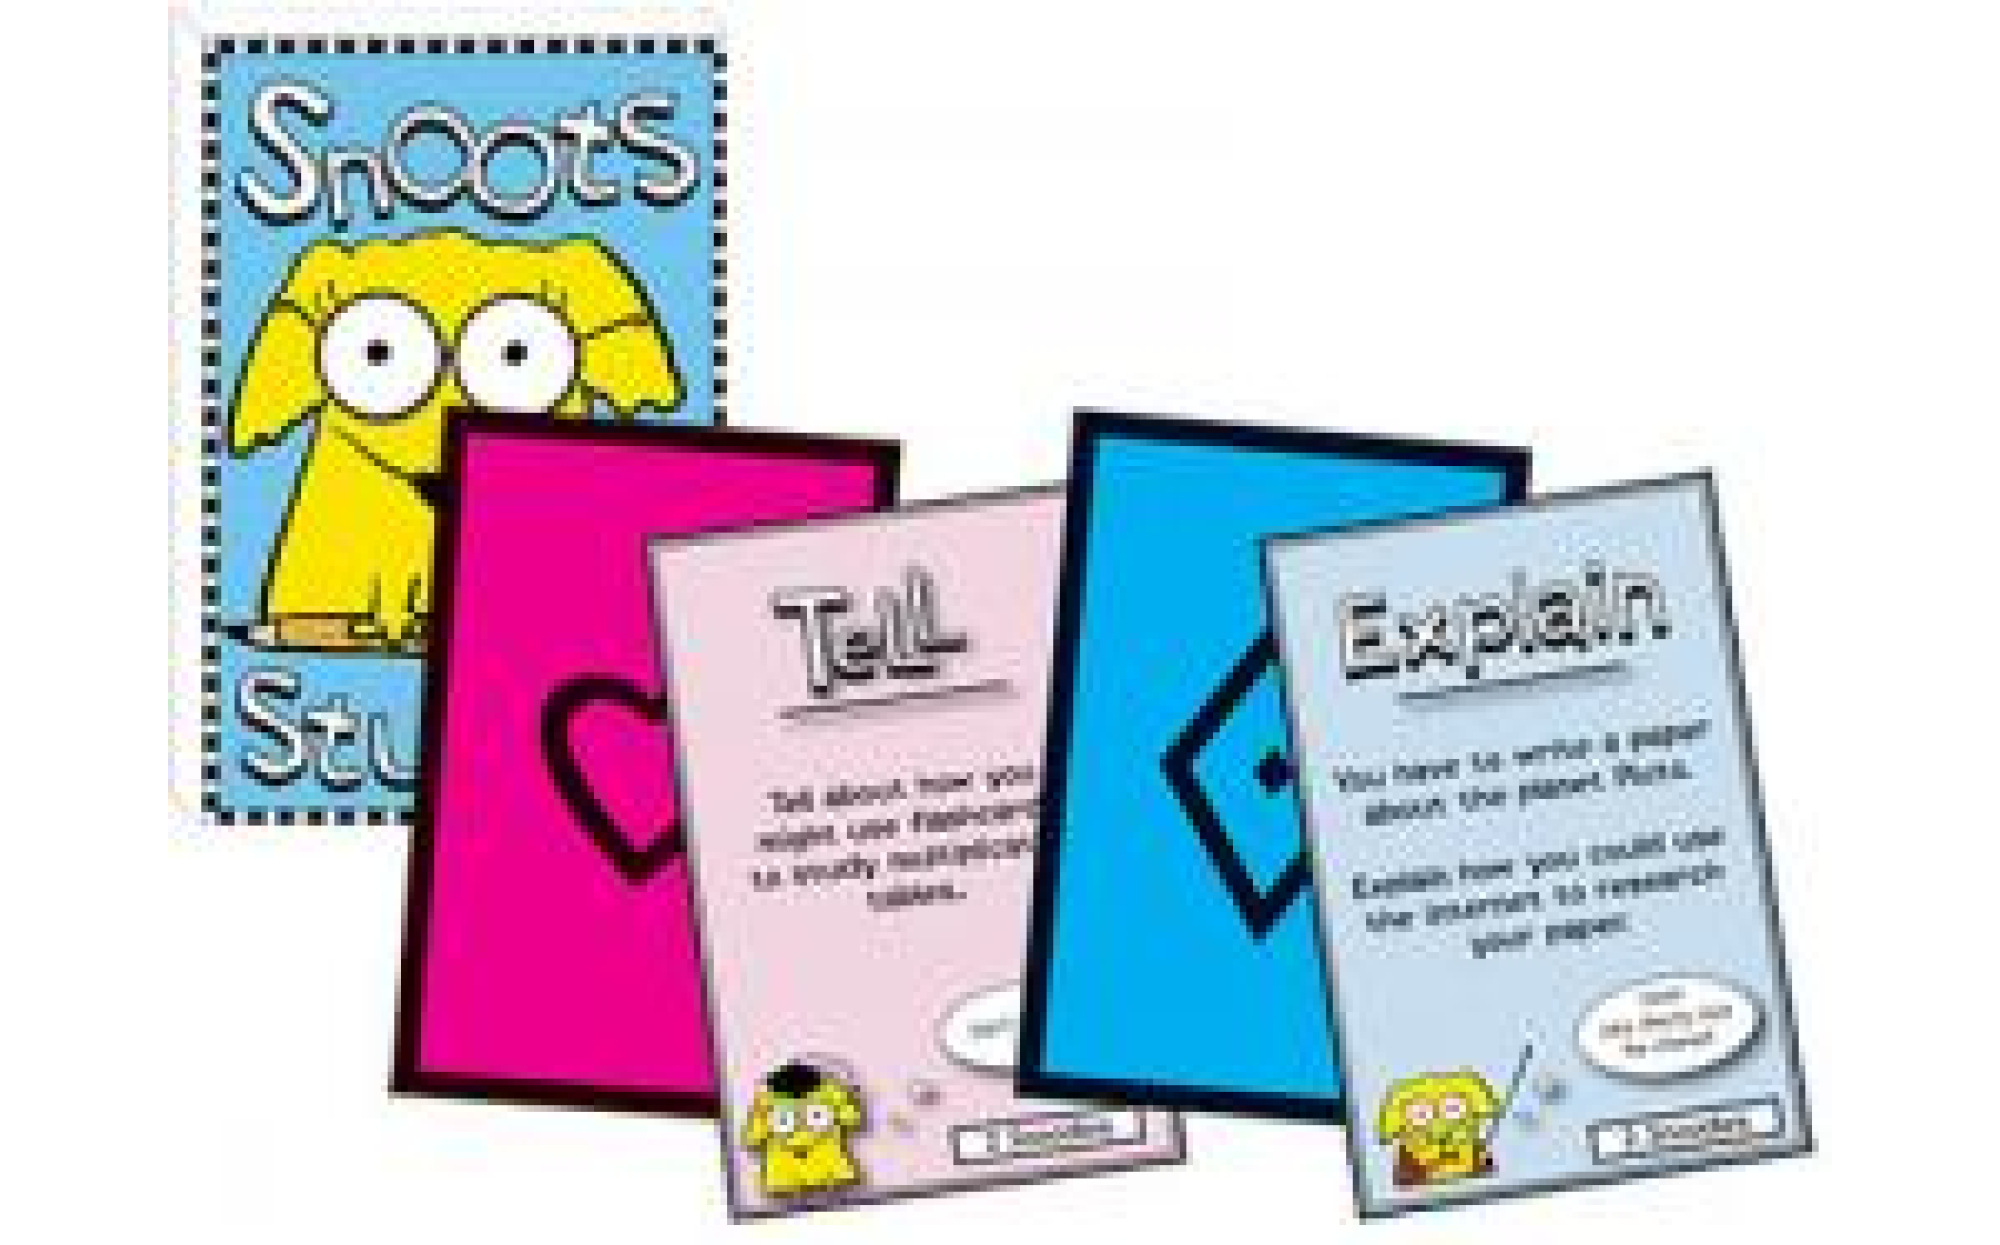 CLUE®: Diary of a Wimpy Kid – The Op Games